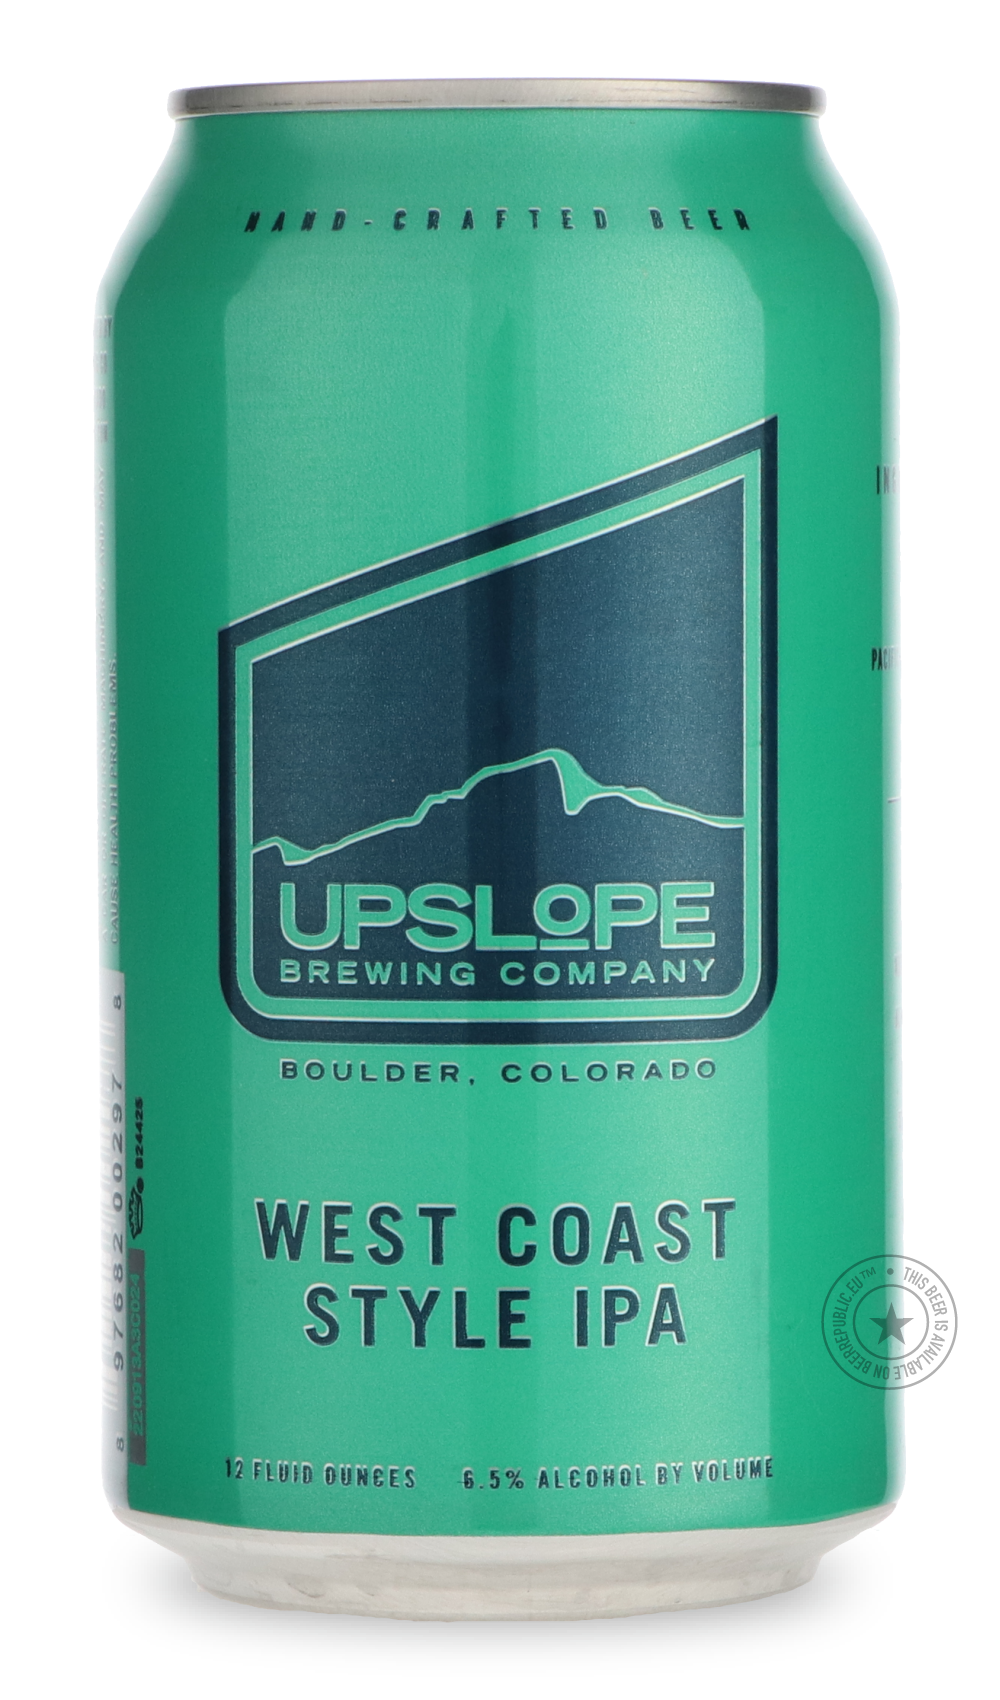 -Upslope- West Coast Style IPA-IPA- Only @ Beer Republic - The best online beer store for American & Canadian craft beer - Buy beer online from the USA and Canada - Bier online kopen - Amerikaans bier kopen - Craft beer store - Craft beer kopen - Amerikanisch bier kaufen - Bier online kaufen - Acheter biere online - IPA - Stout - Porter - New England IPA - Hazy IPA - Imperial Stout - Barrel Aged - Barrel Aged Imperial Stout - Brown - Dark beer - Blond - Blonde - Pilsner - Lager - Wheat - Weizen - Amber - Ba